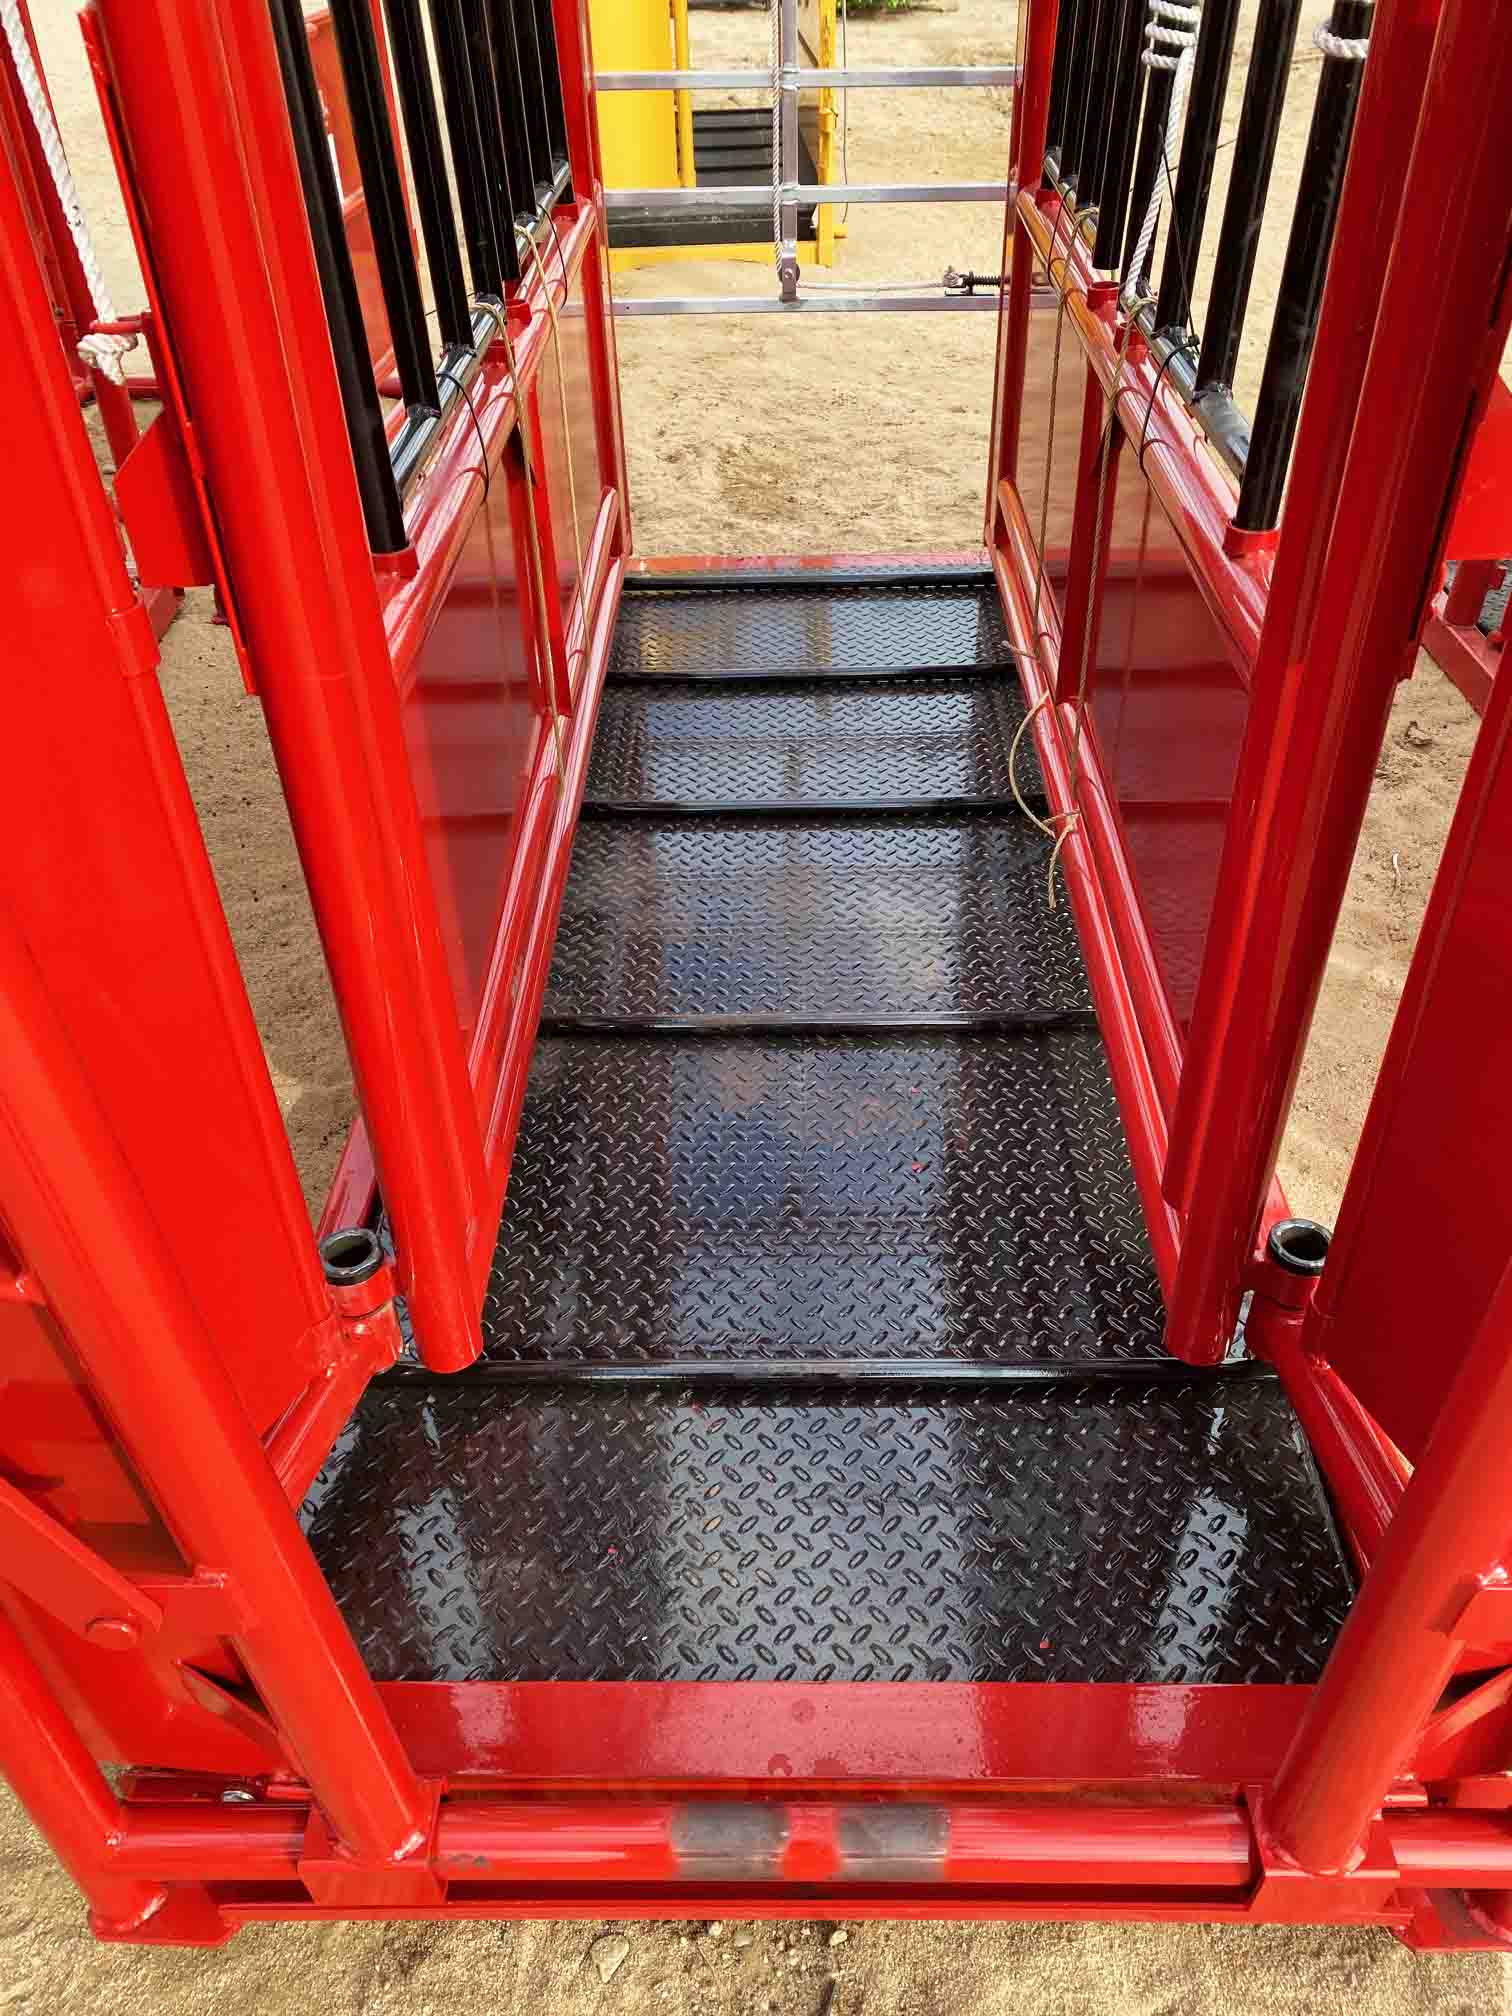 Renegade Cattle Squeeze Chute w/ 12 Panels